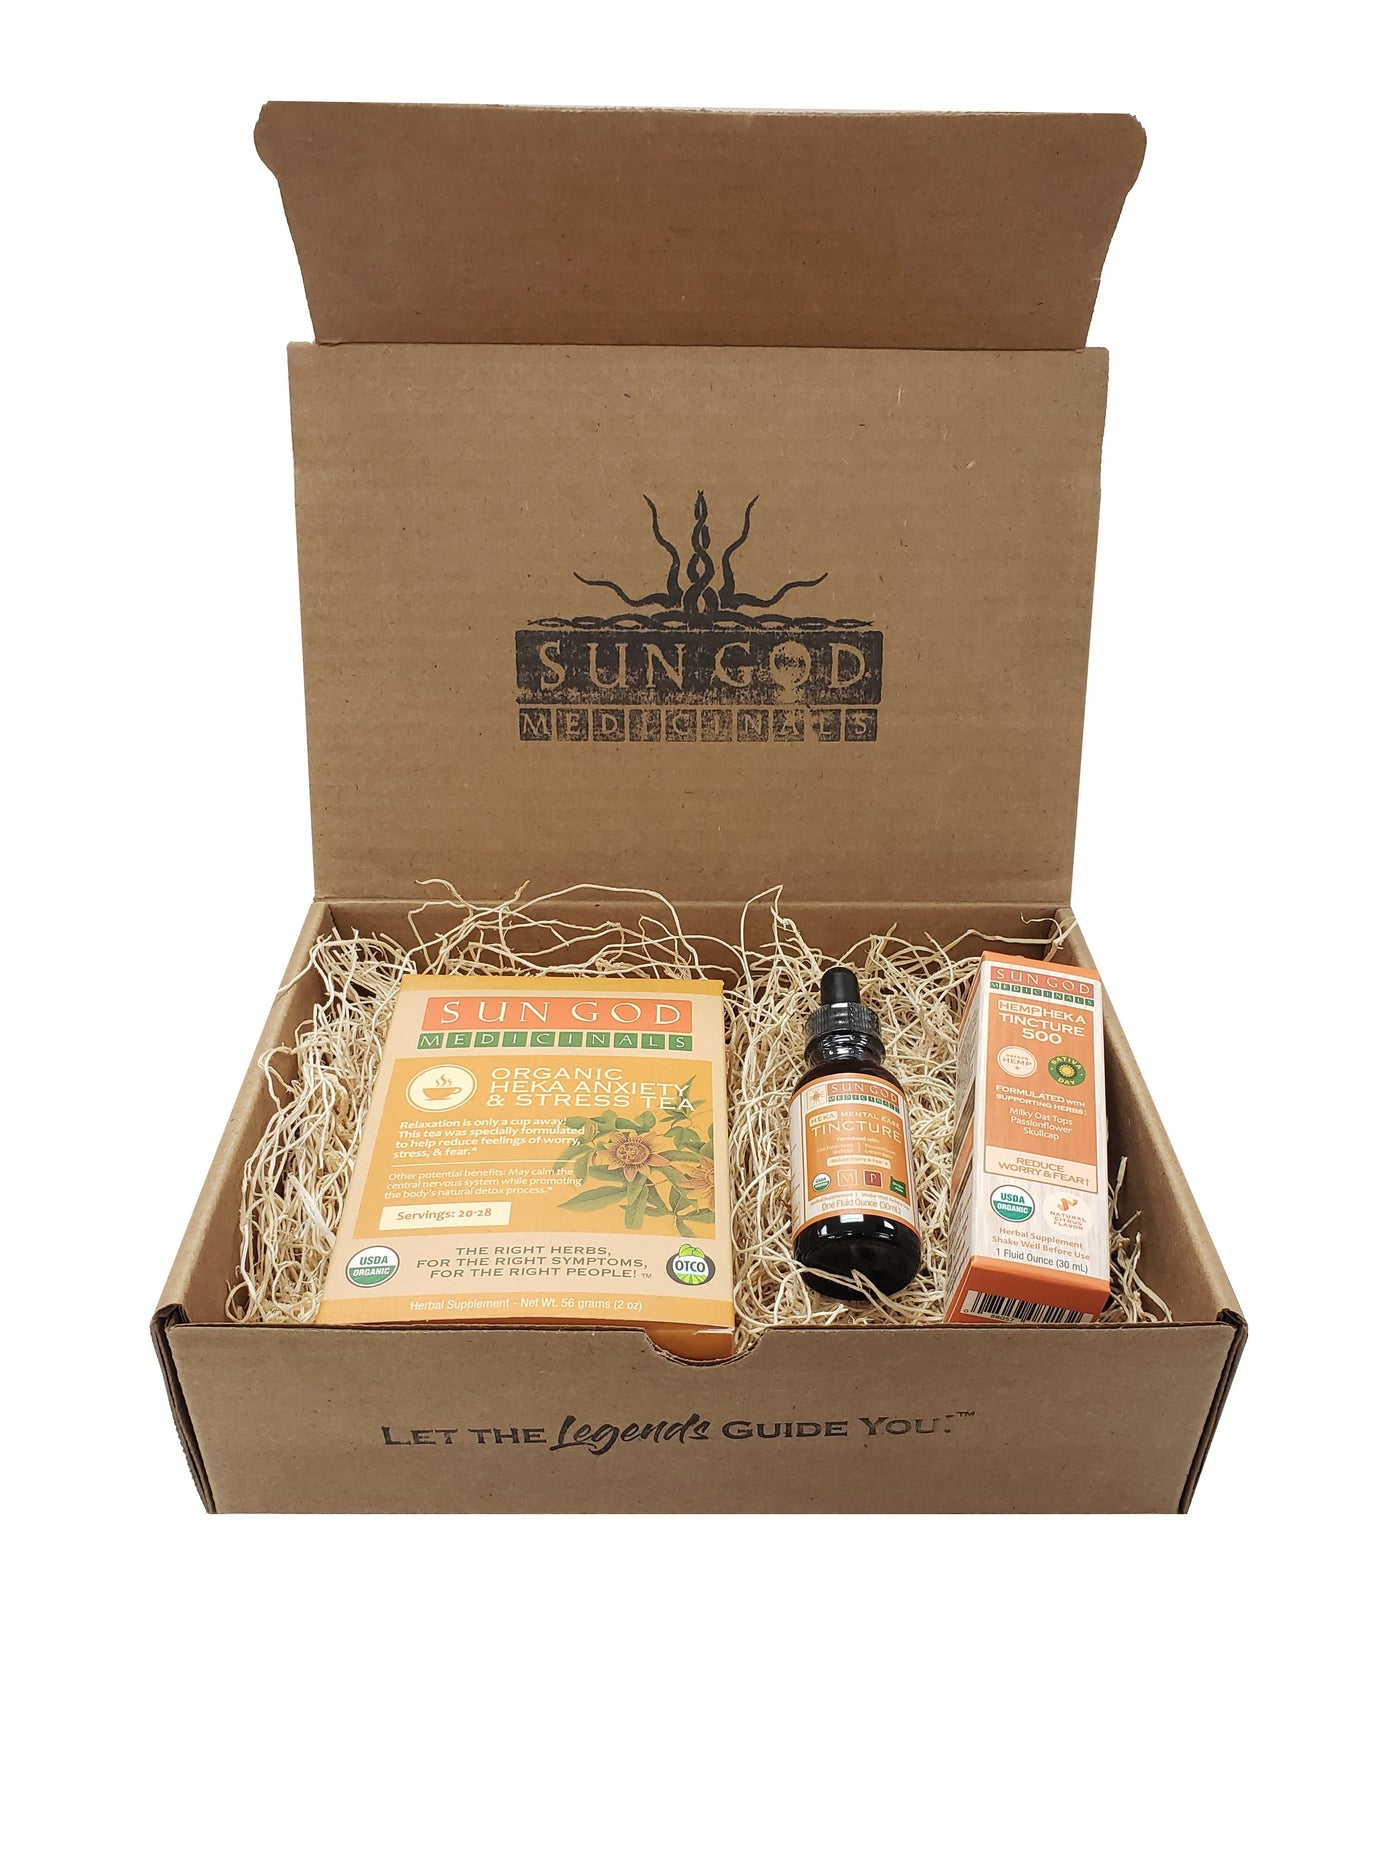 Mild Anxiety, Stress, and Fear Relief Gift Box - Sun God Medicinals